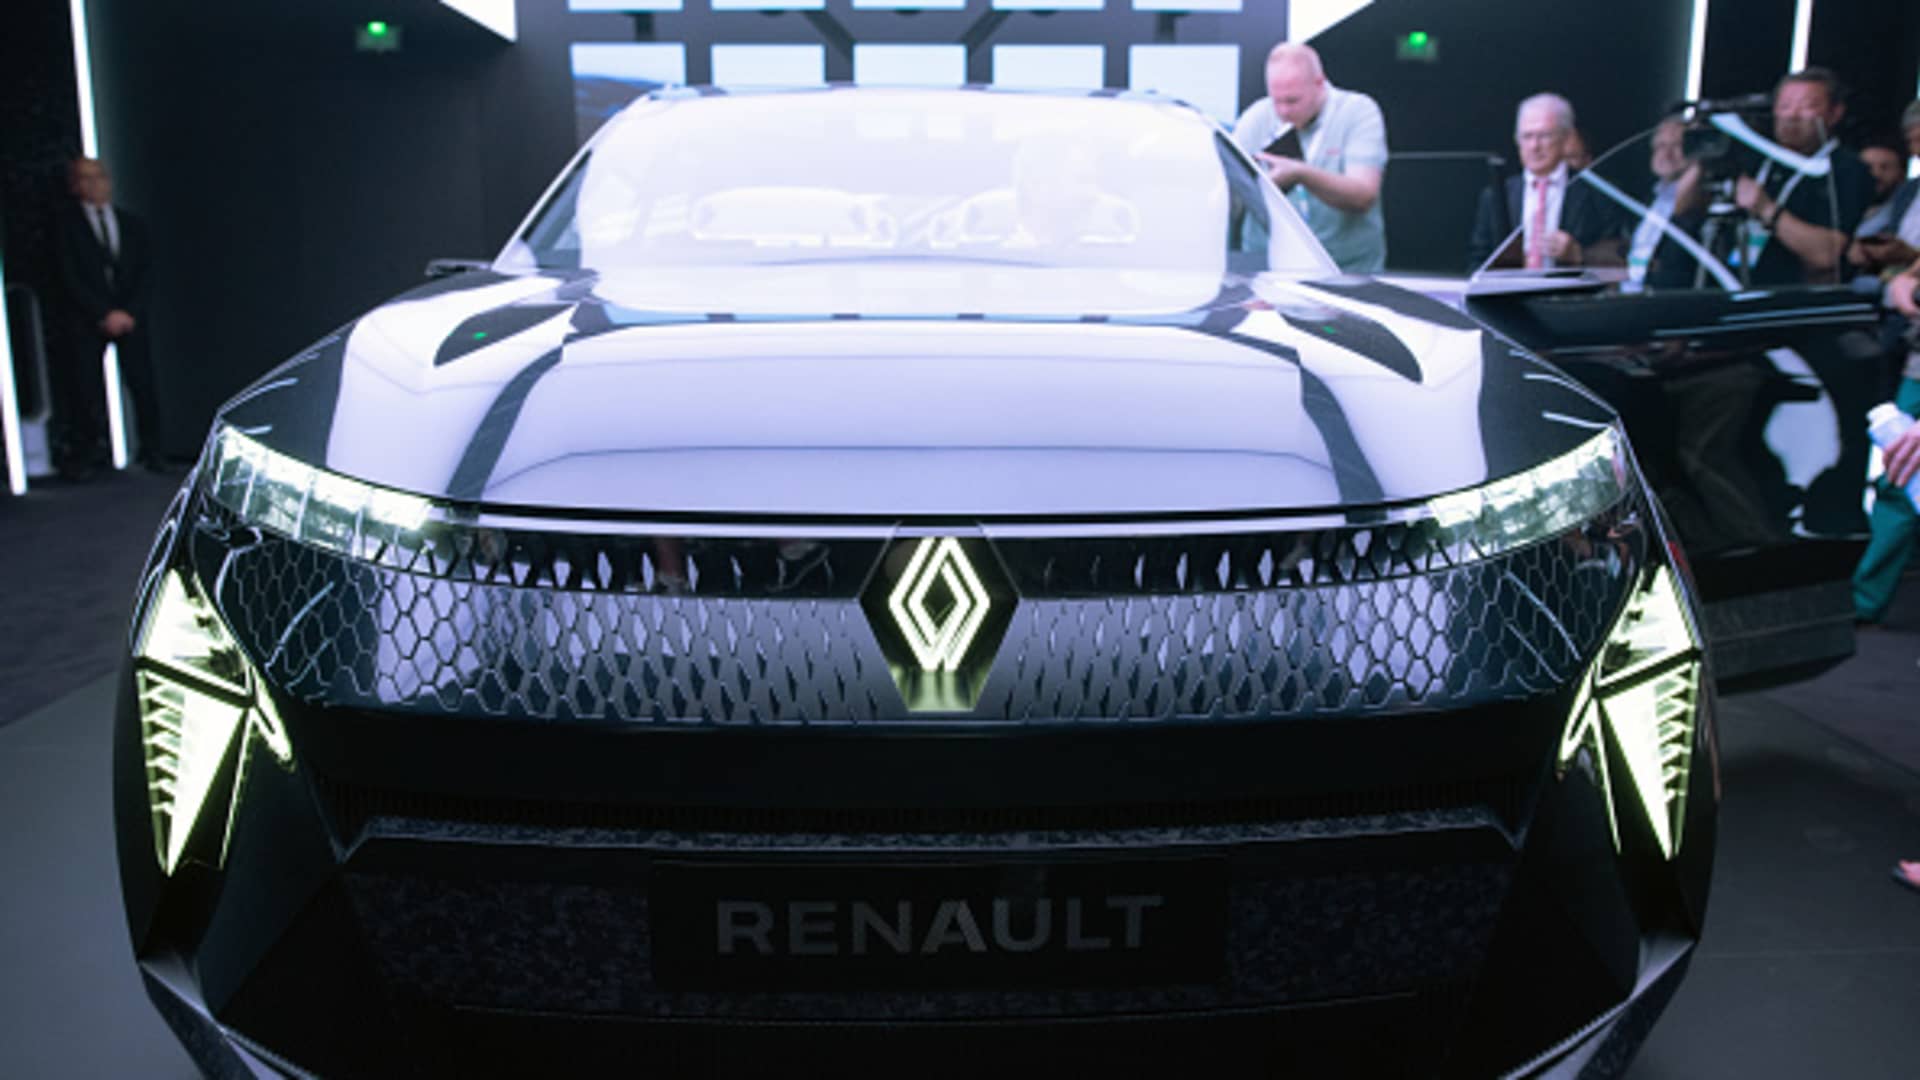 Renault reveals electric-hydrogen hybrid concept car, says it will have range of..